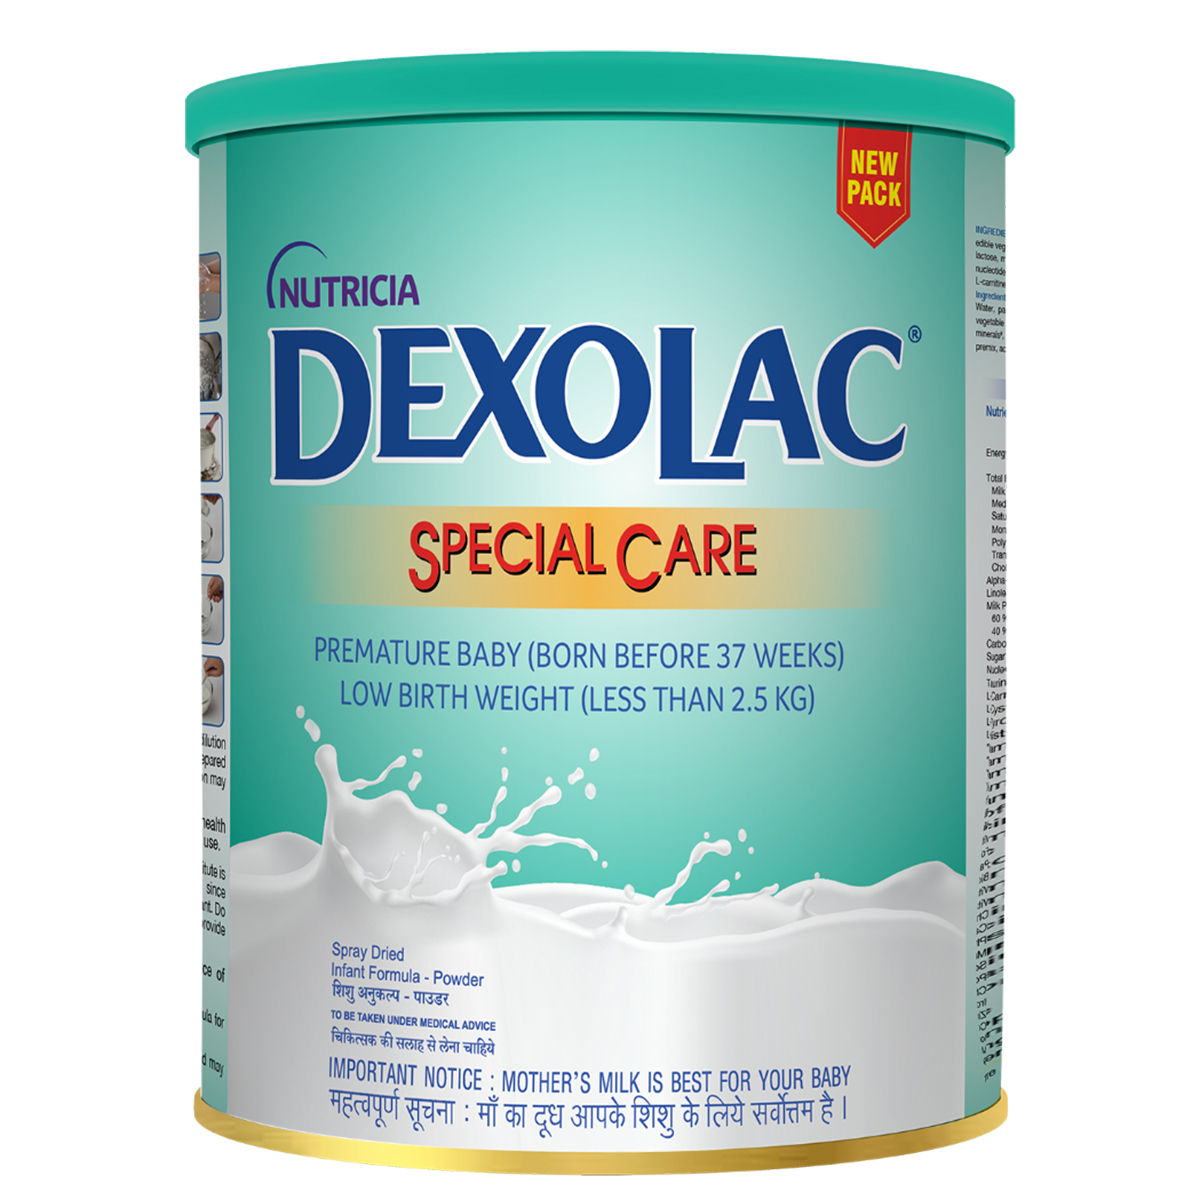 Buy Dexolac Special Care Infant Formula Powder for Premature Baby (Born Before 37 Weeks), 400 gm Tin Online